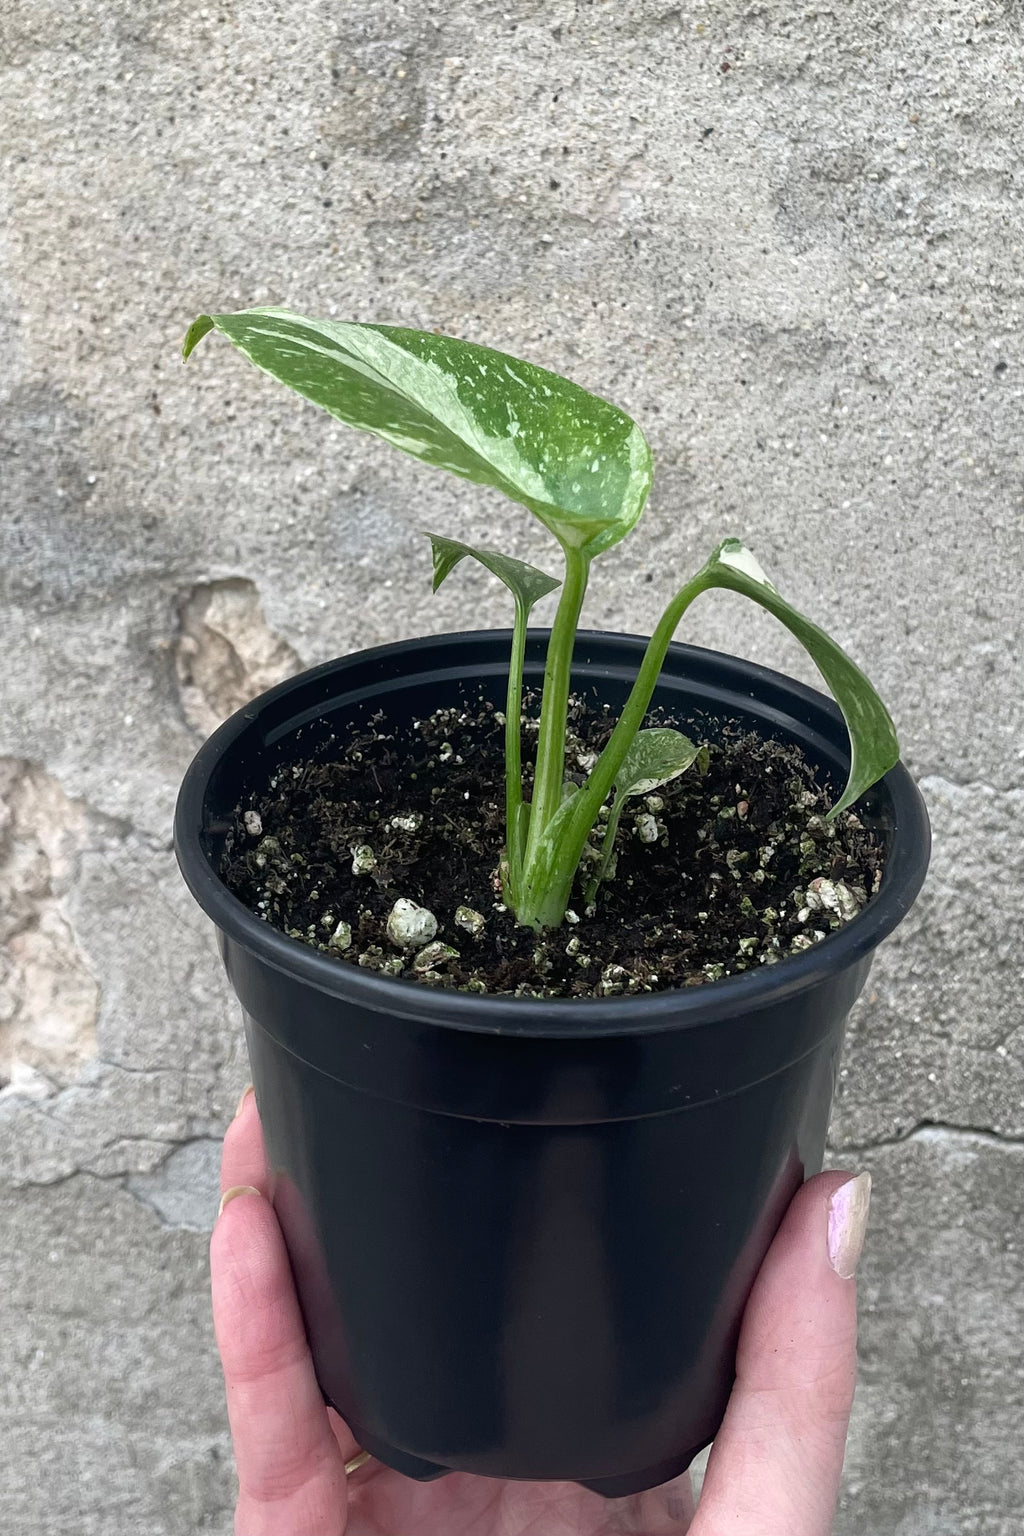  Thai Constellation Monstera - Live Plant in a 4 Inch